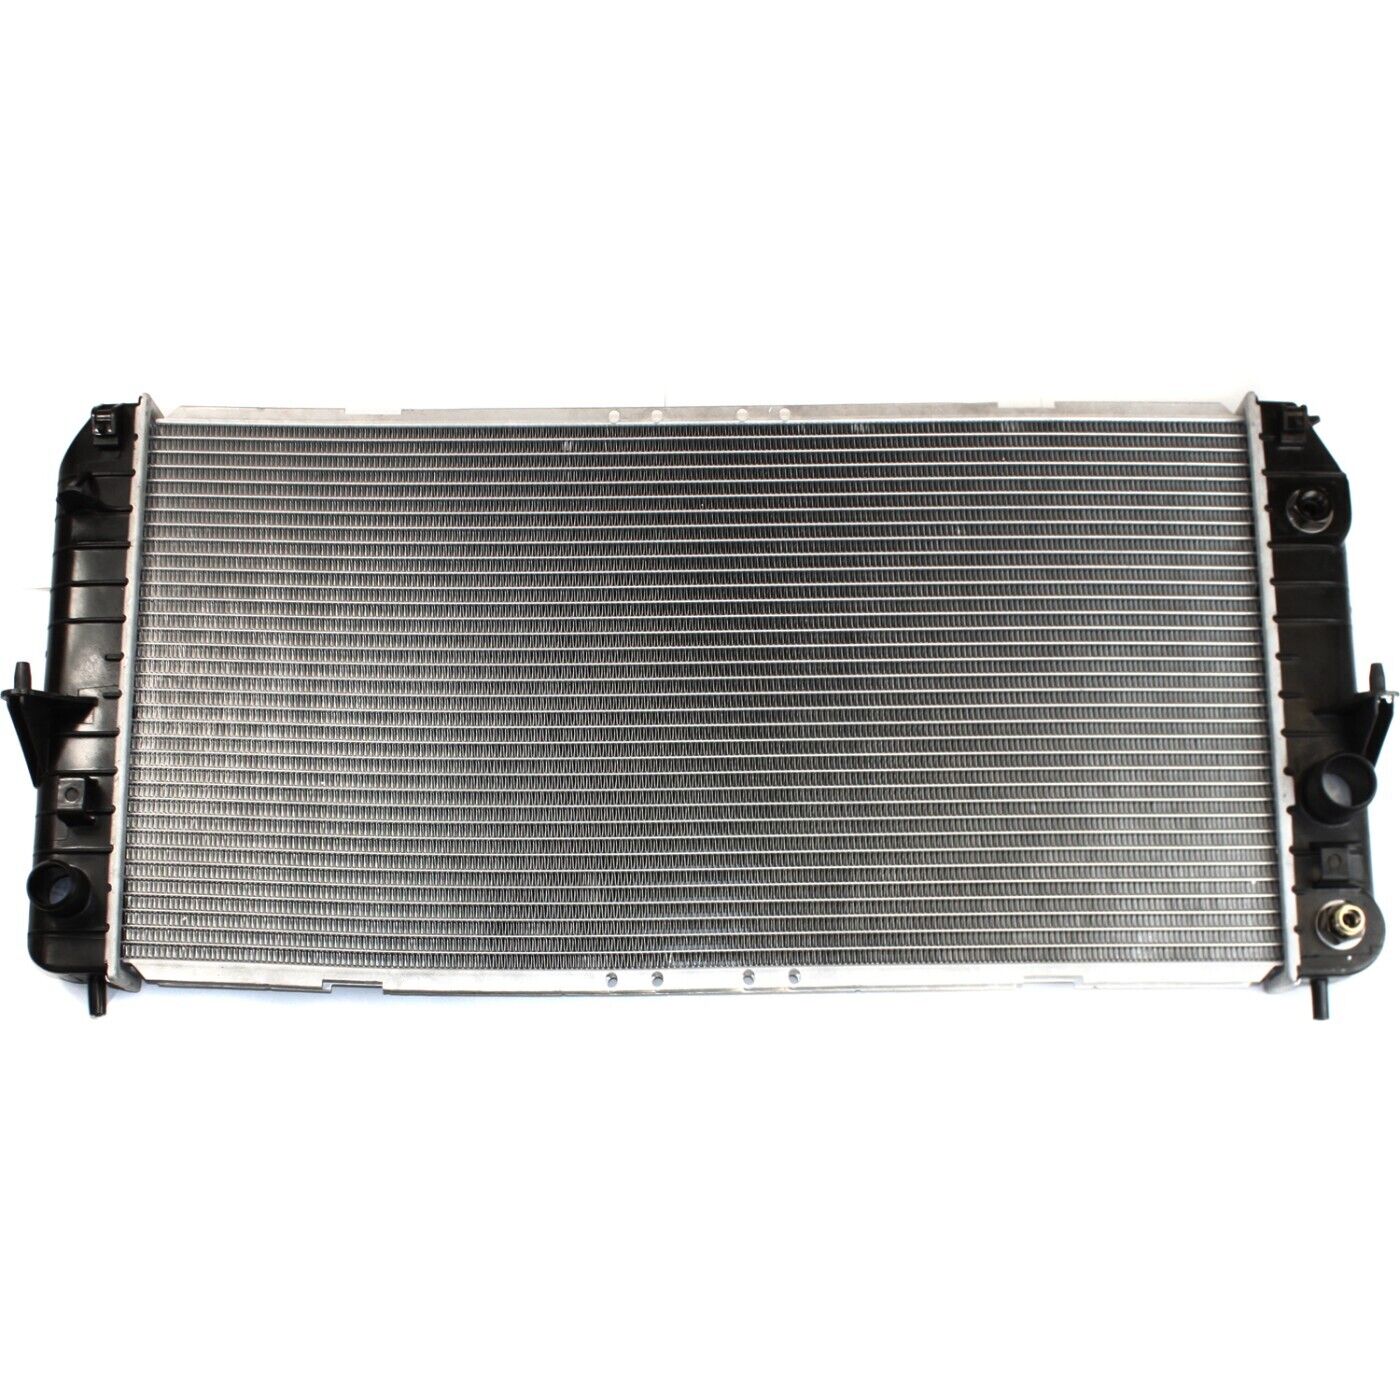 Radiator For 2001-04 Cadillac Seville 4.6L 1 Row W/ Eng Oil Cooler